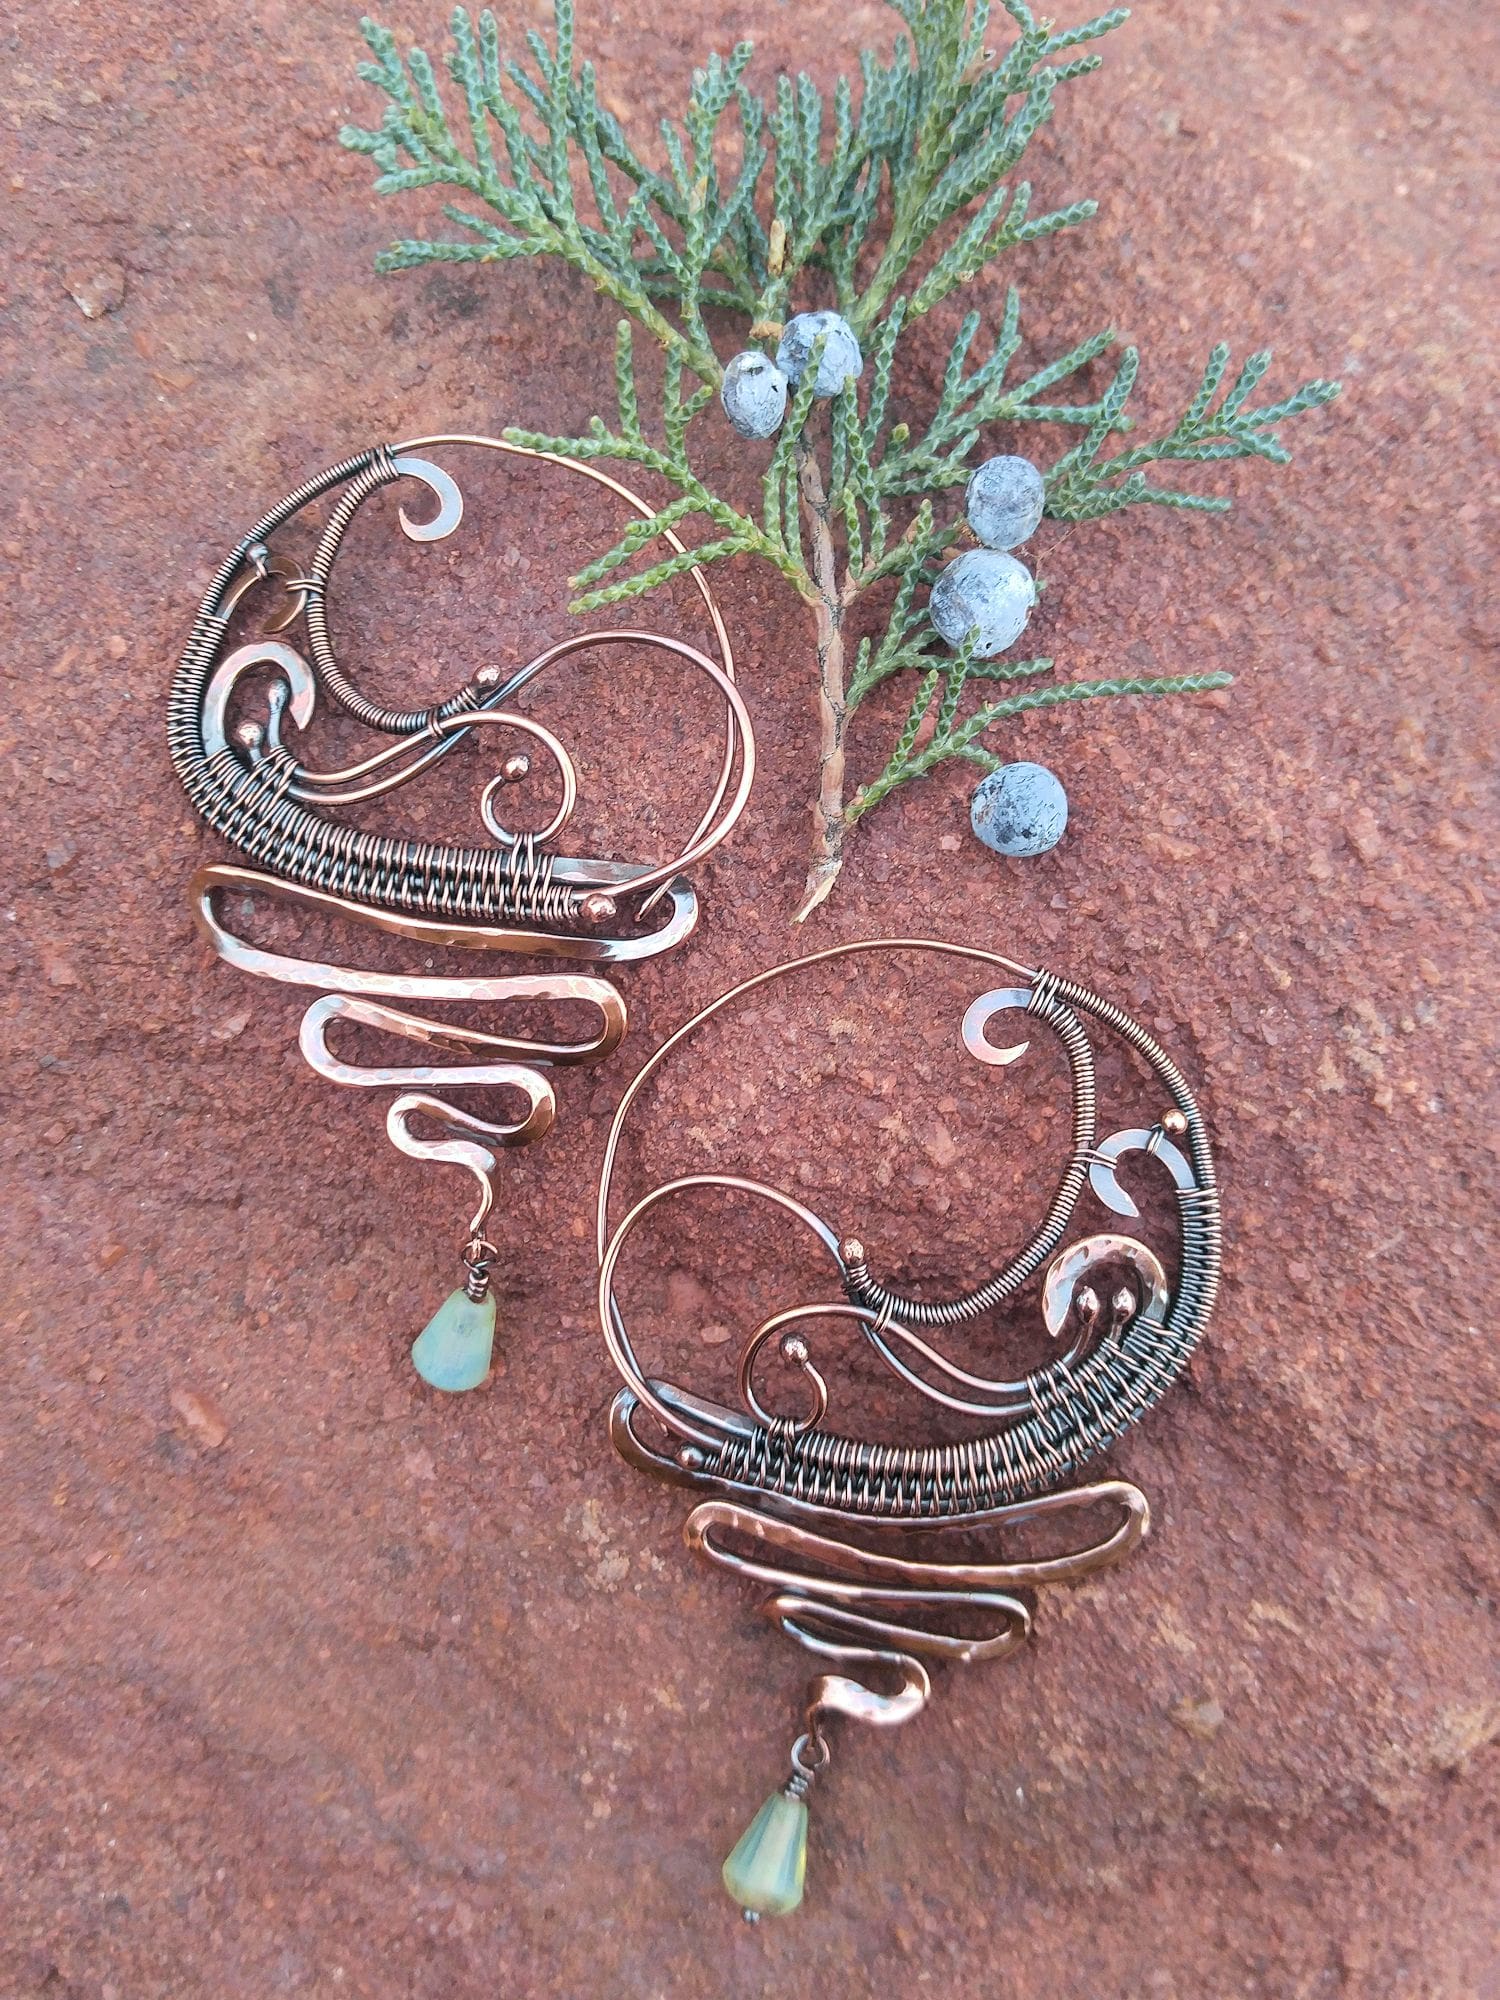 The Scribble Earrings - Design by Sarah Thompson, Fabricated by Wendi Reamy